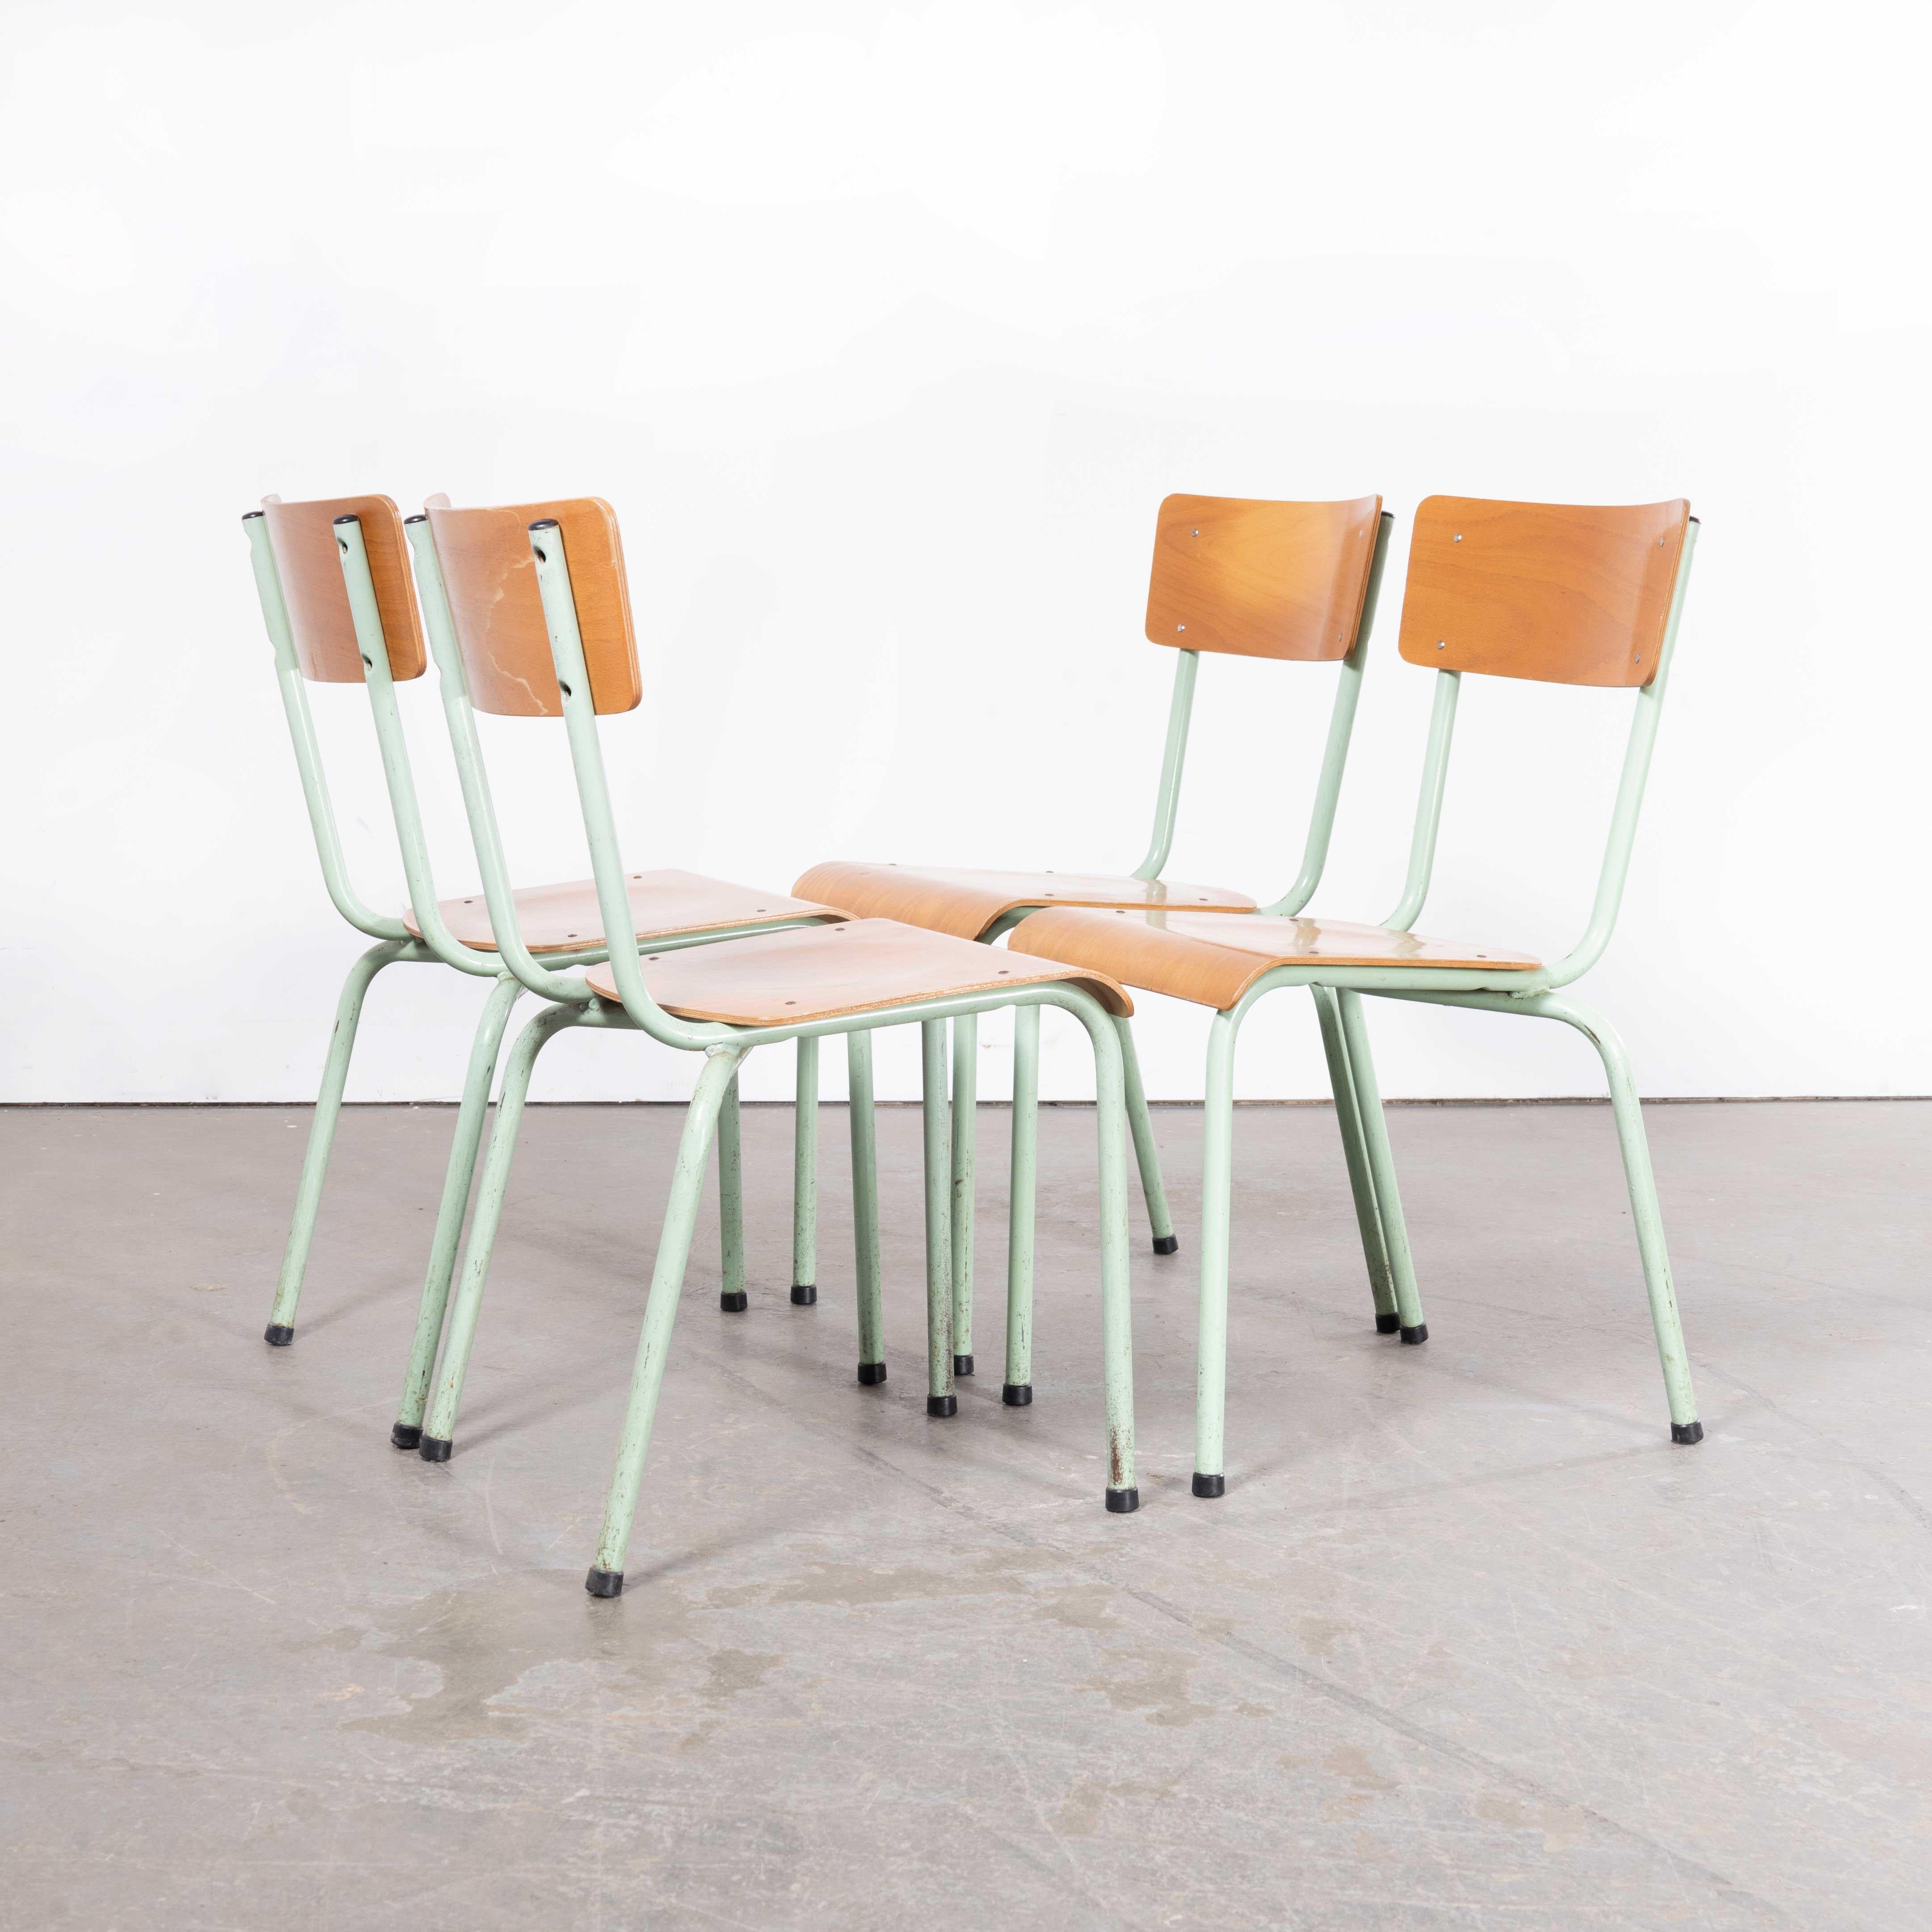 1960’s Original Mint French Stacking University Chairs Wide Back - Set Of Four For Sale 1